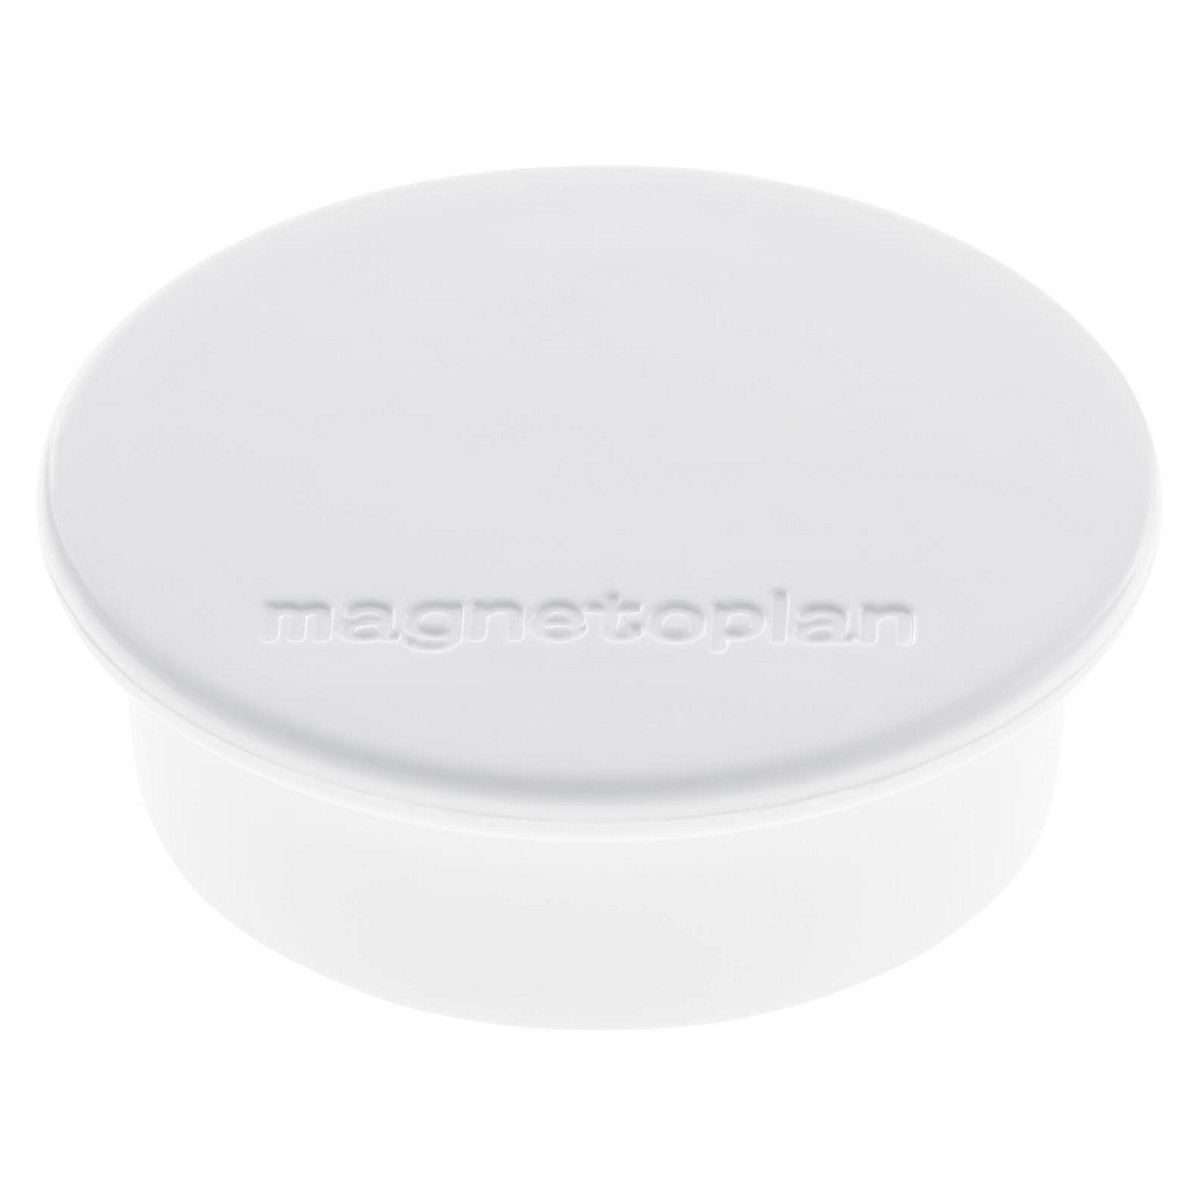 DISCOFIX COLOUR magnet – magnetoplan, Ø 40 mm, pack of 40, white-8